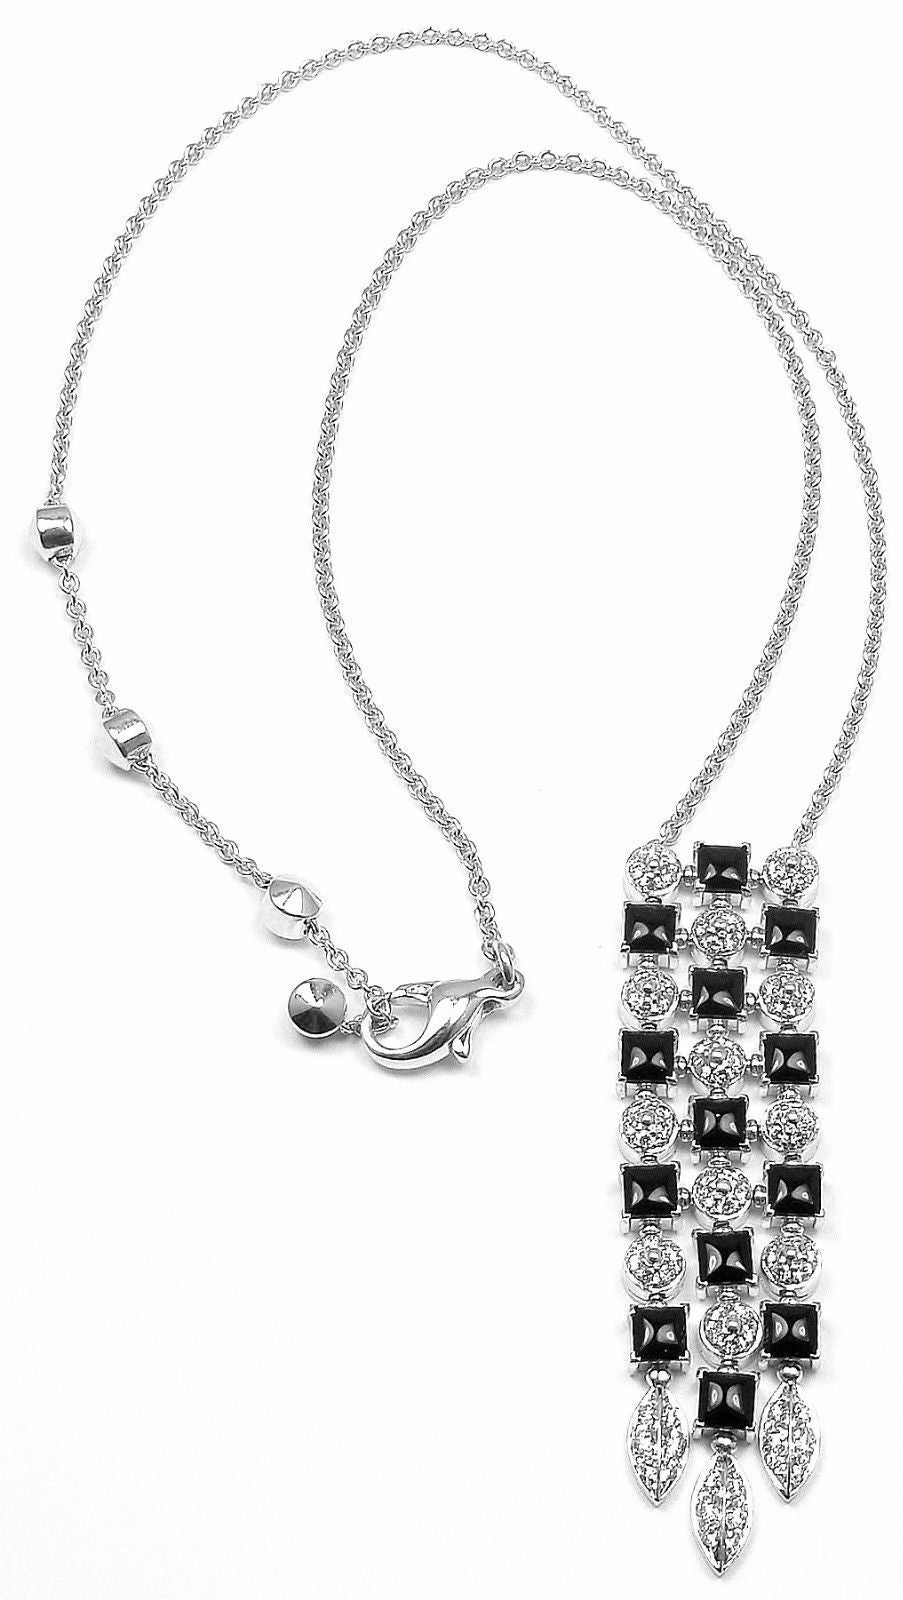 18k White Gold Diamond Onyx Pendant Necklace by Bulgari. 
With 78 round brilliant cut diamonds VS1 clarity, G color total weight 
approx. 1.50ct and 13 black onyx stones

Details:
Weight: 21.7 grams
Chain Length: 15